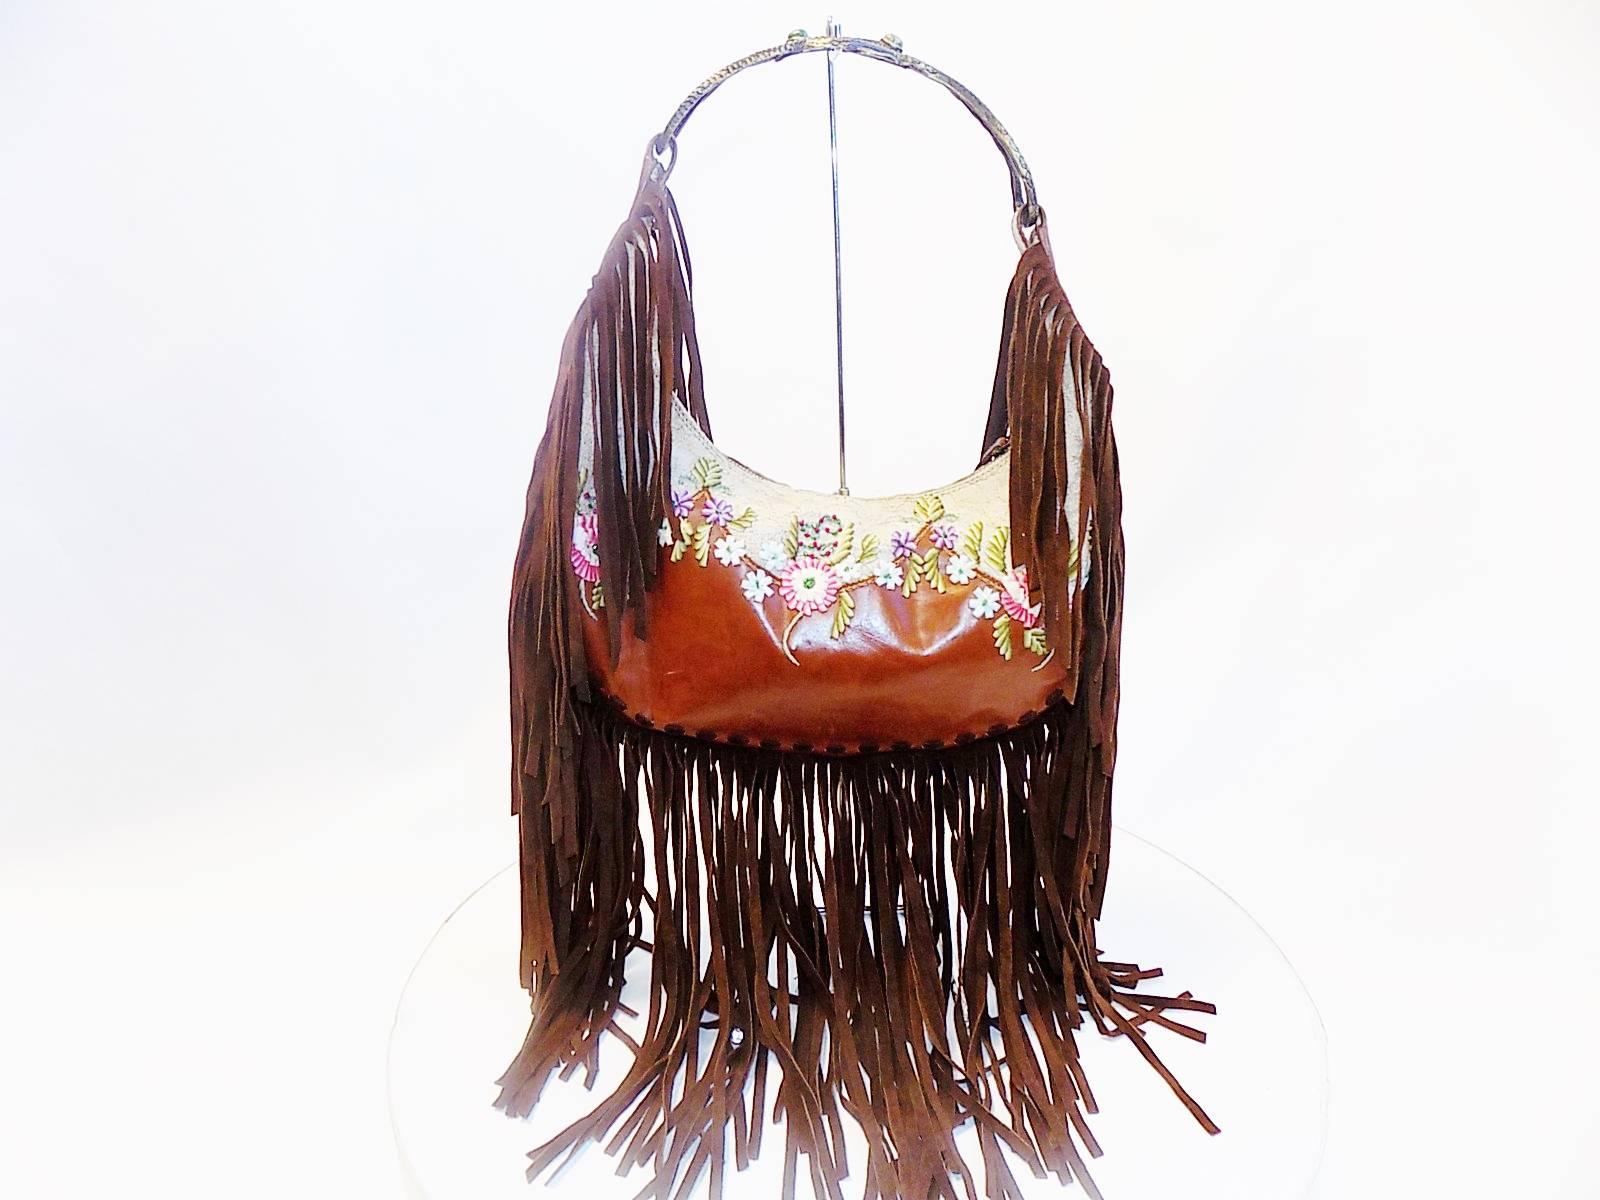 Beautiful brown leather with lace and hand ribboned embroidery adorned with beads. Serpent handle with jade stones. Long suede fringes. Very rare bag, there is a few black suede on the market, but not like this one. Pristine condition. 
Height: